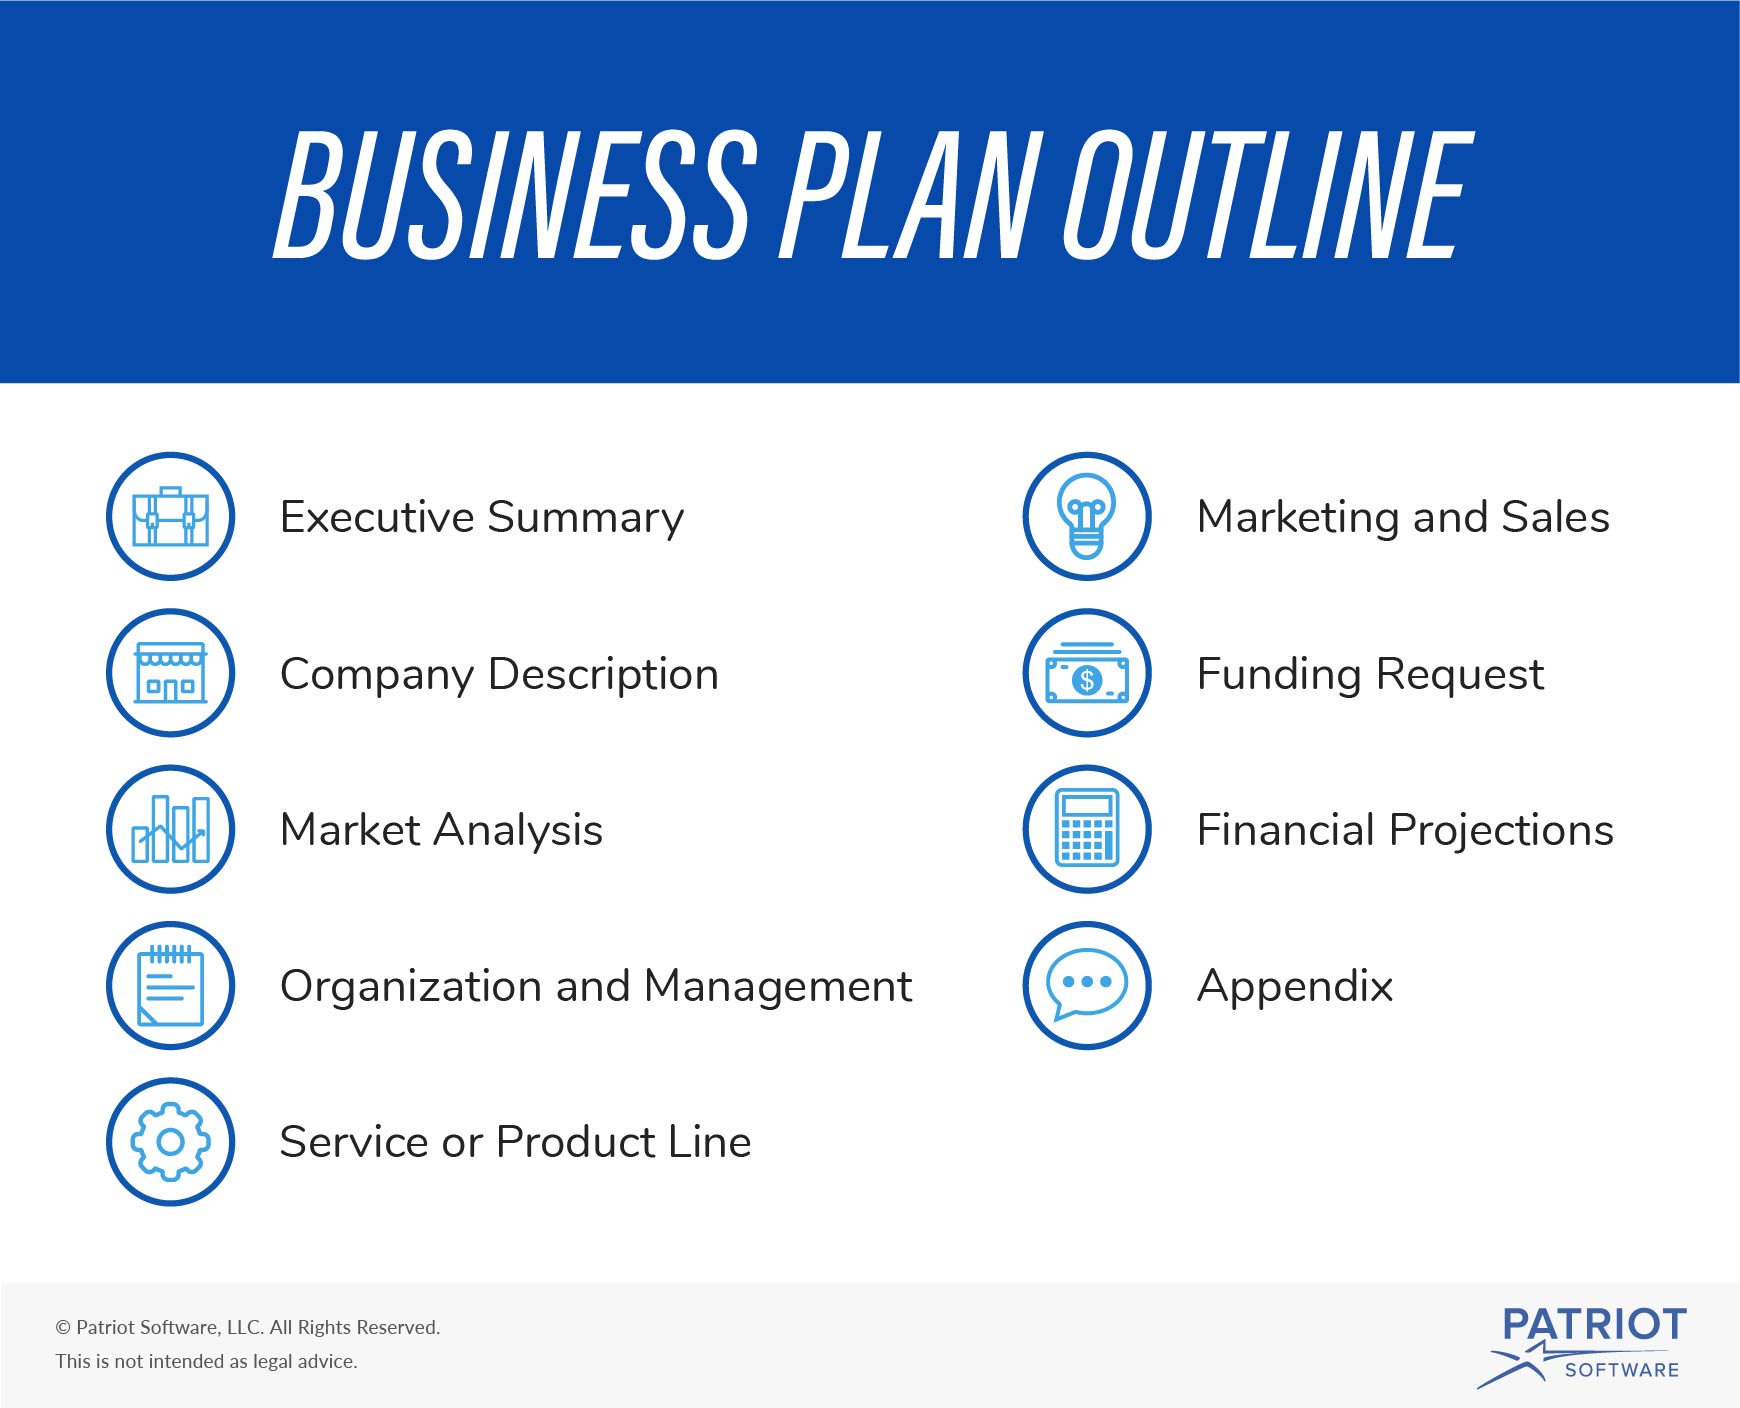 write a comprehensive business plan for small business enterprise